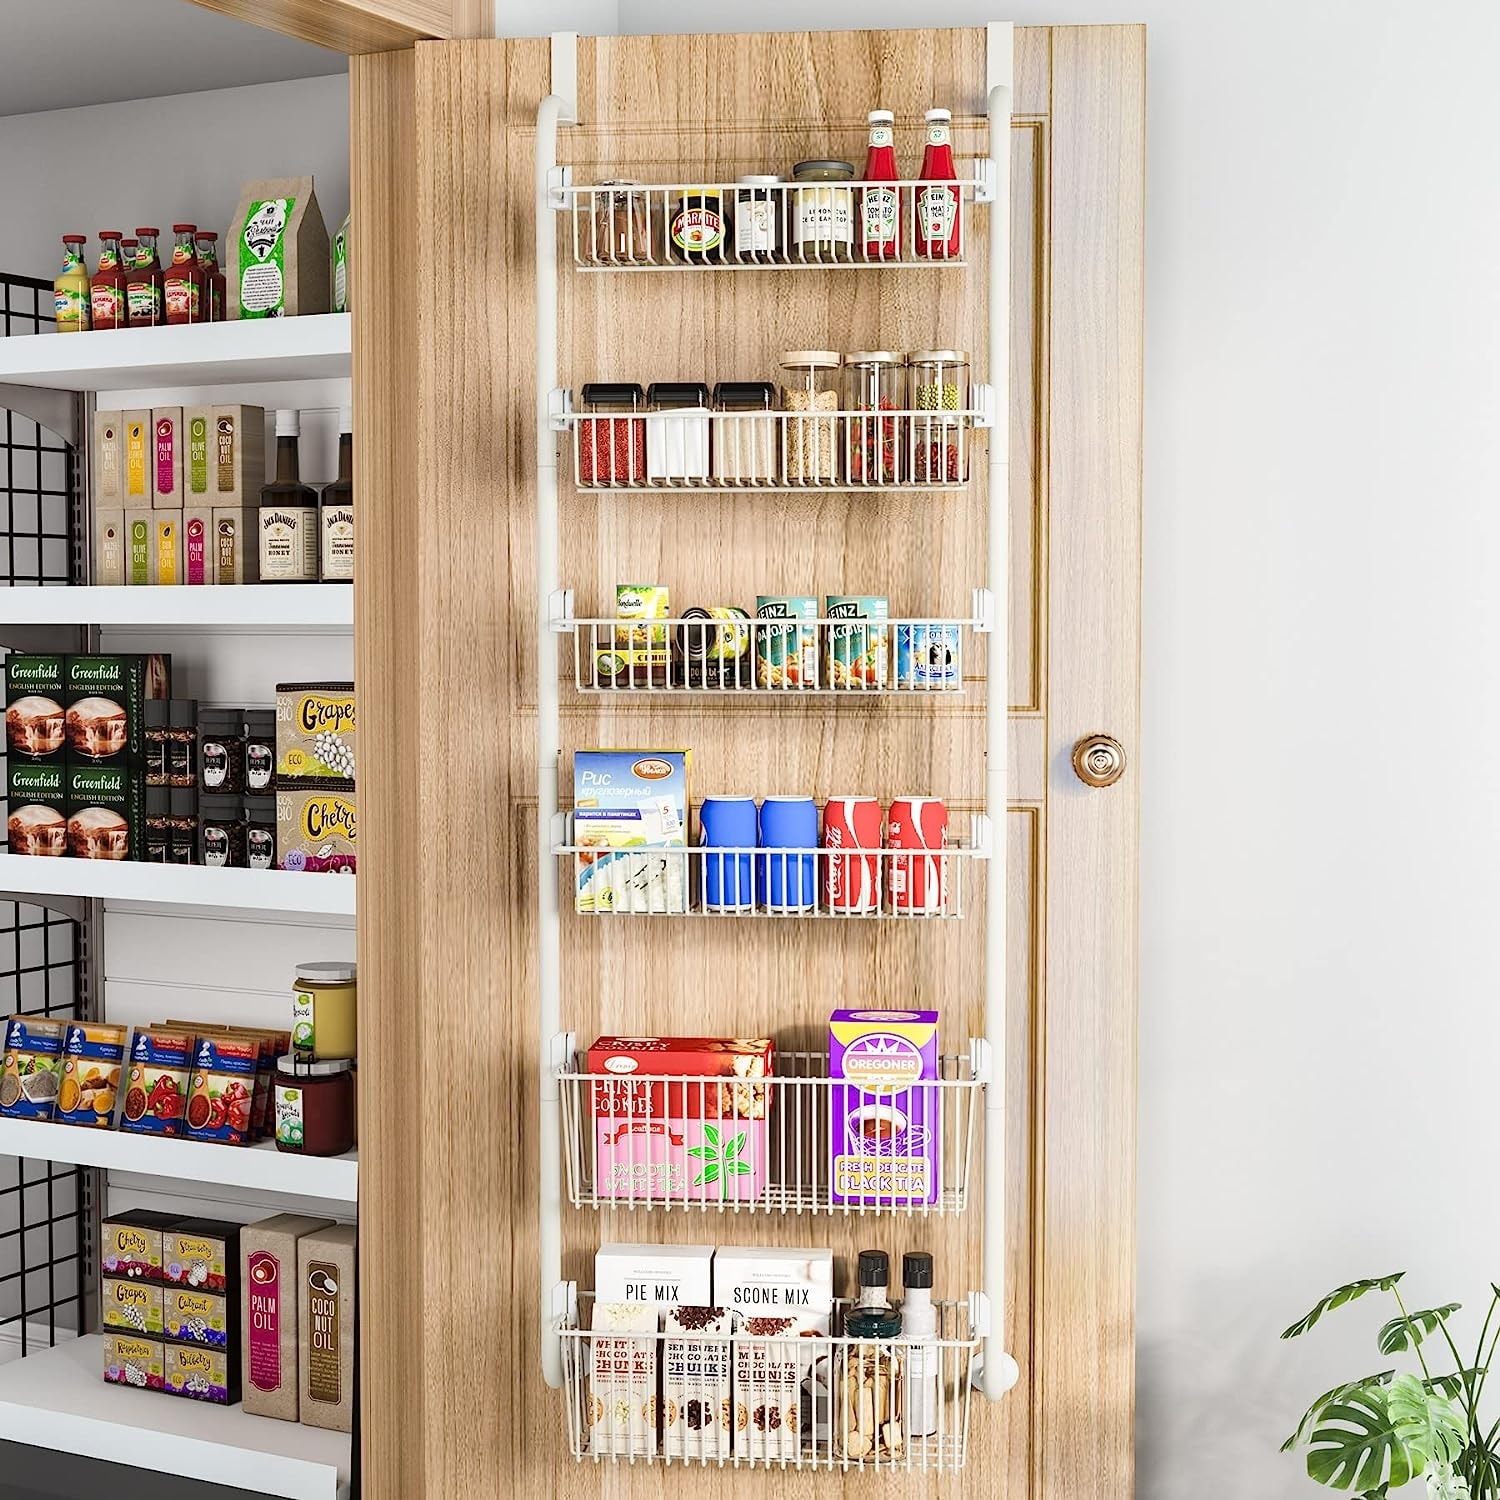 https://ak1.ostkcdn.com/images/products/is/images/direct/4bb9335e80cbf72783f3dba54cb930982cd735f3/6-Tier-Over-the-Door-Pantry-Organizer%2C-Metal-Kitchen-Spice-Rack.jpg